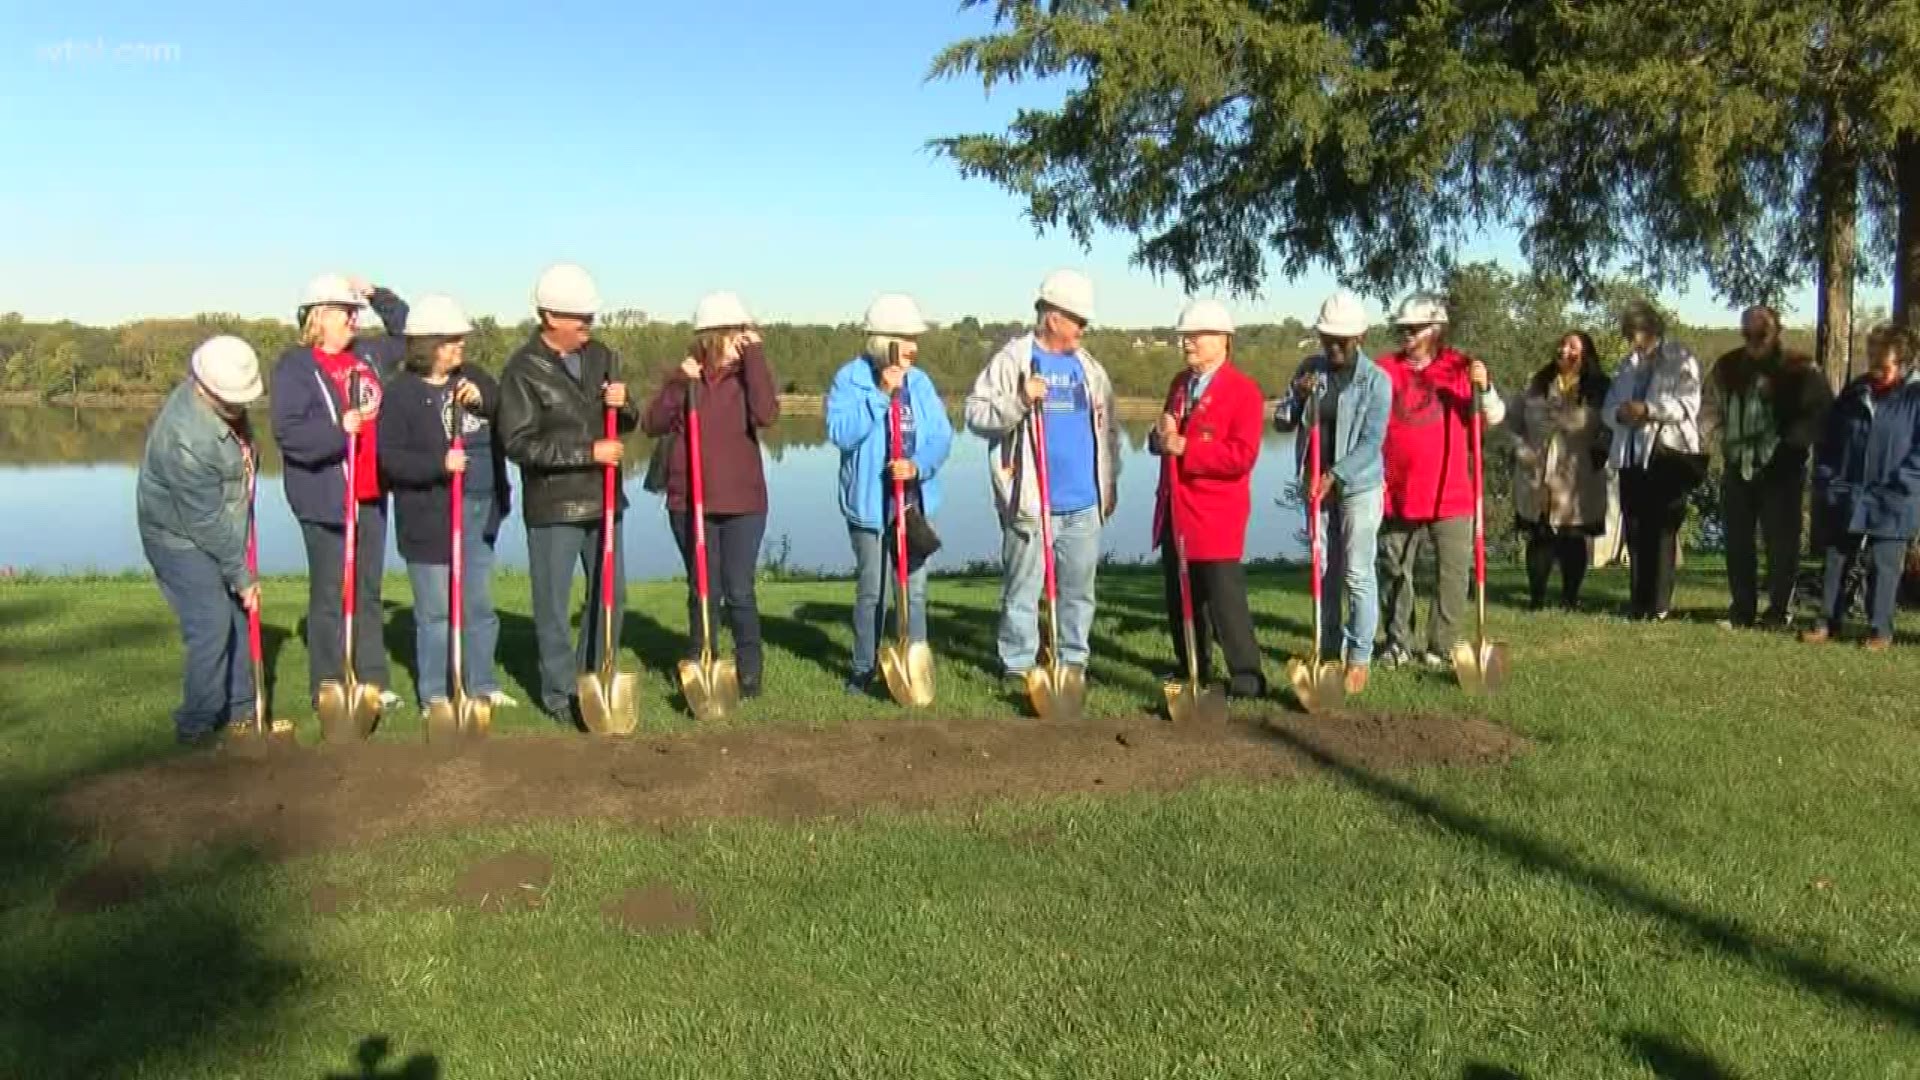 The ceremony was held in Perrysburg. Fundraising will continue for the project as the total cost comes to a price of $60,000.